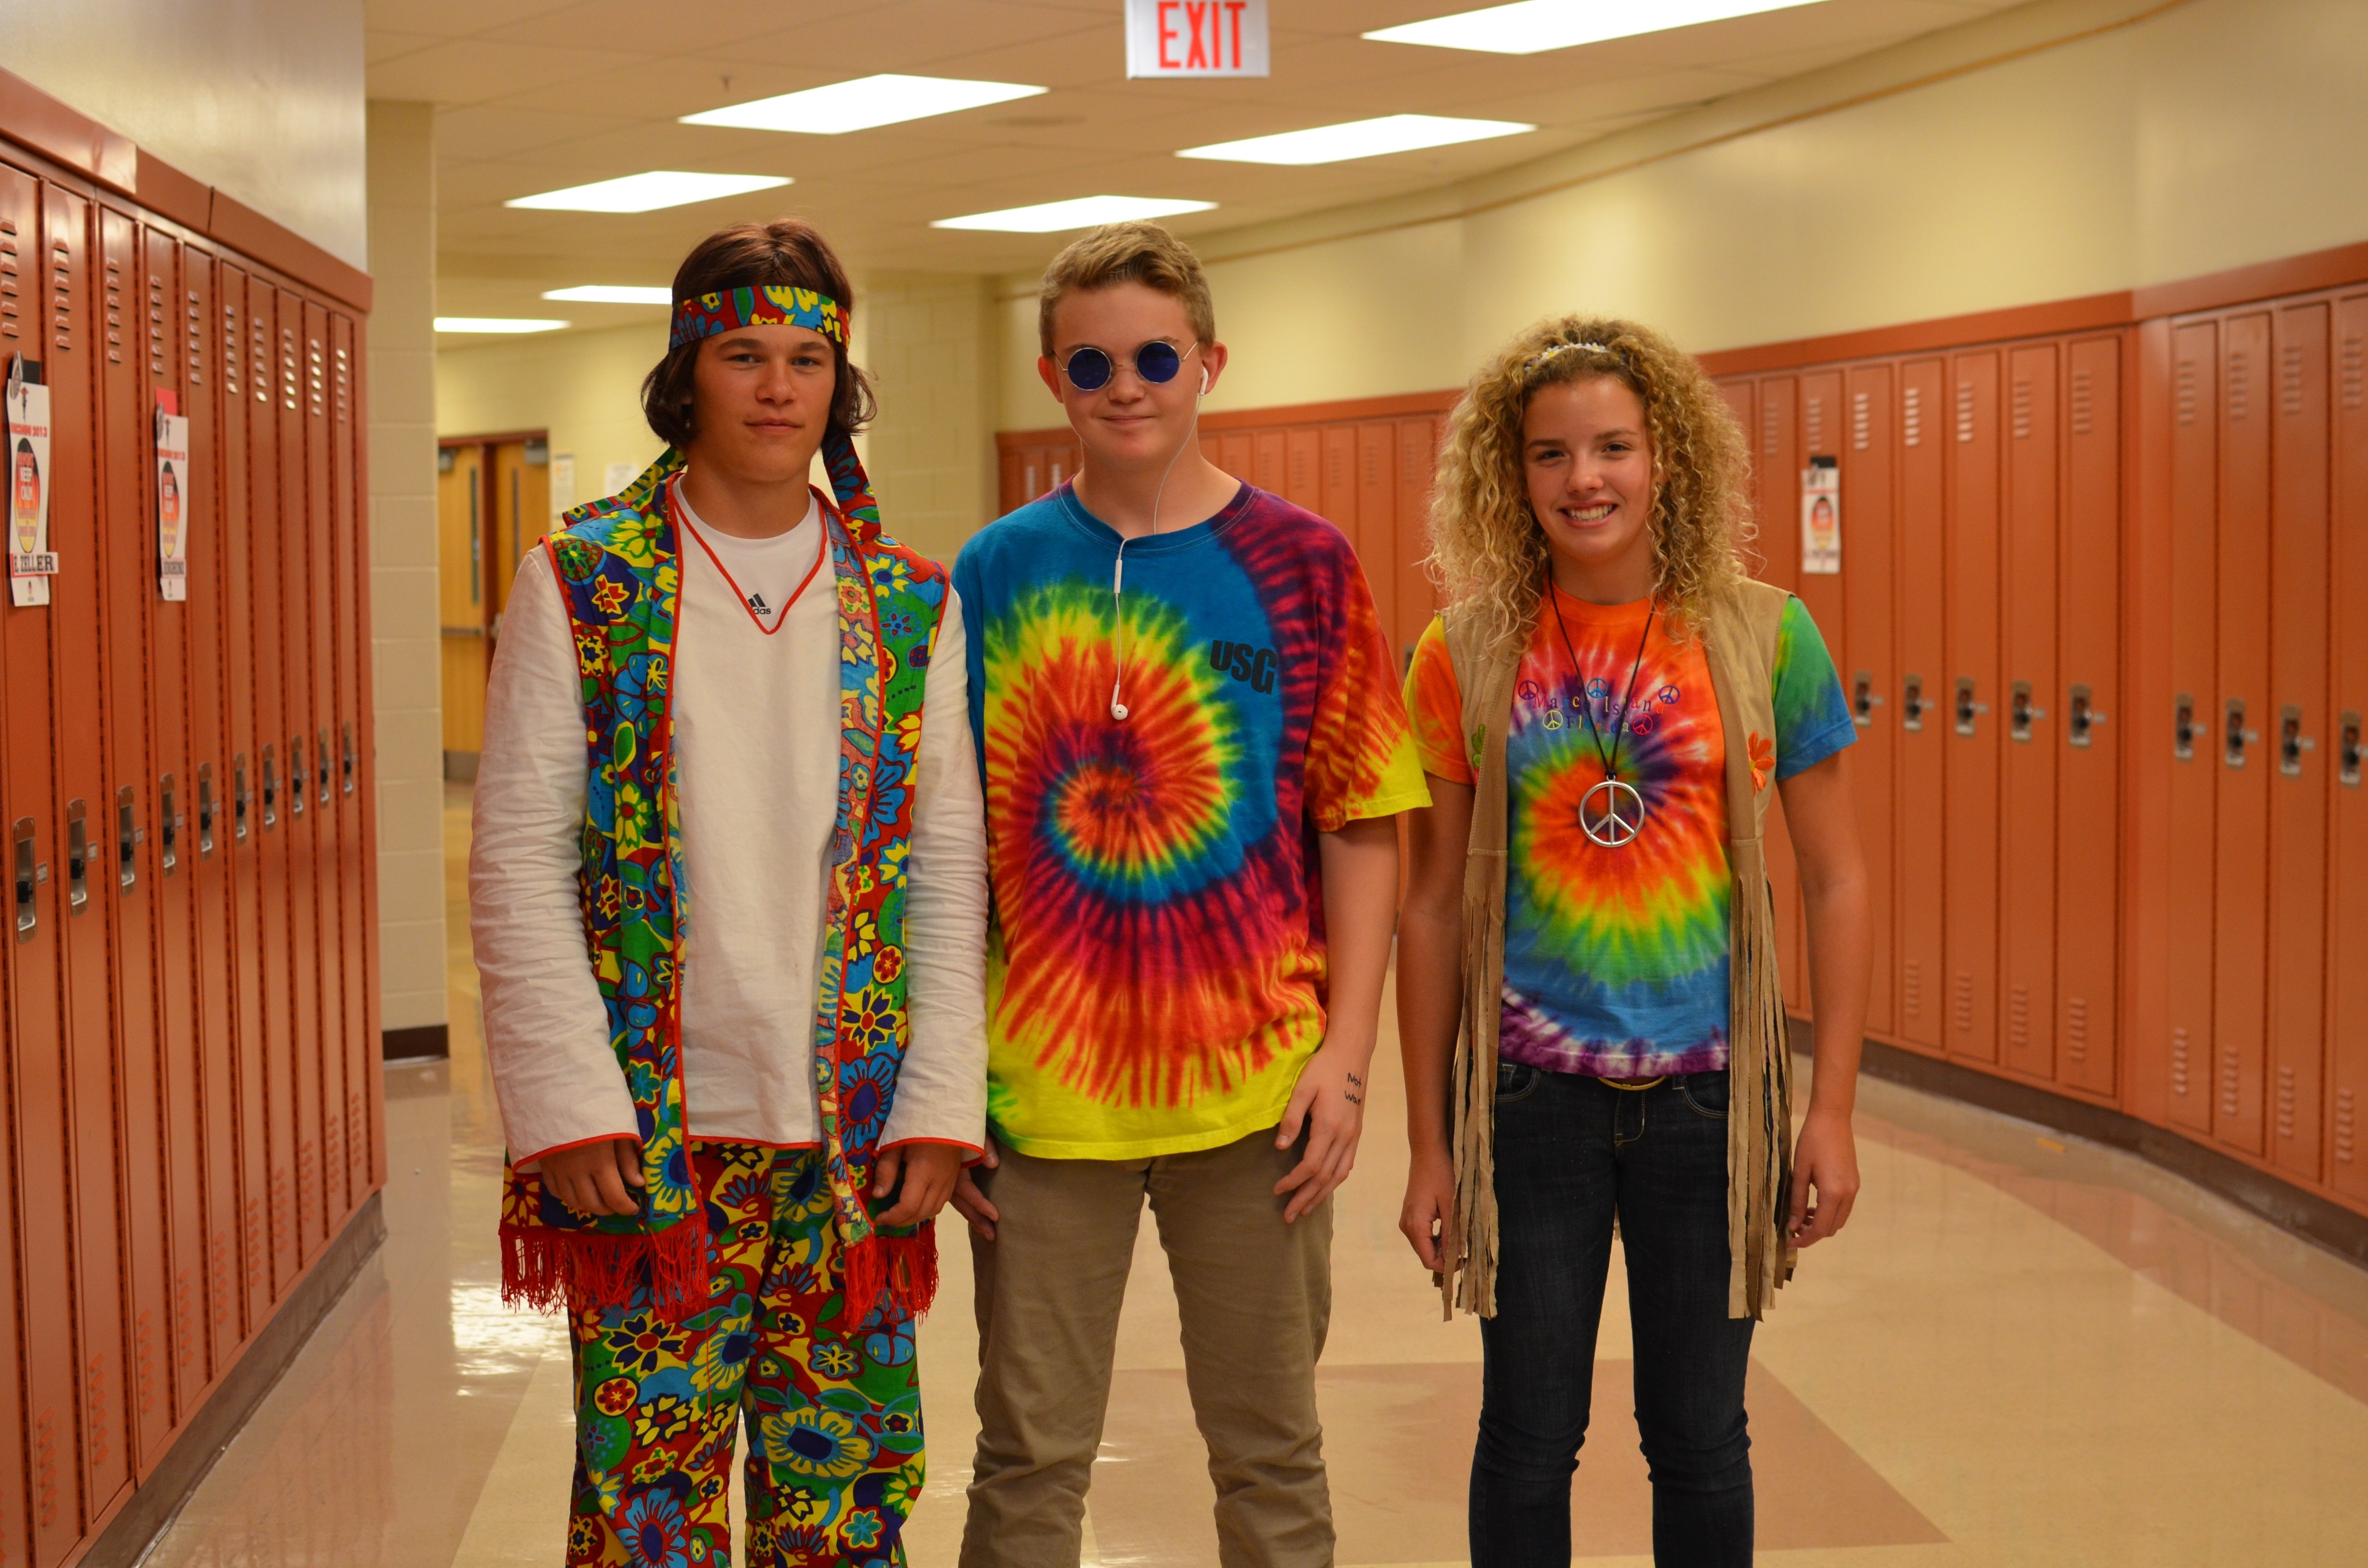 Image result for decade day